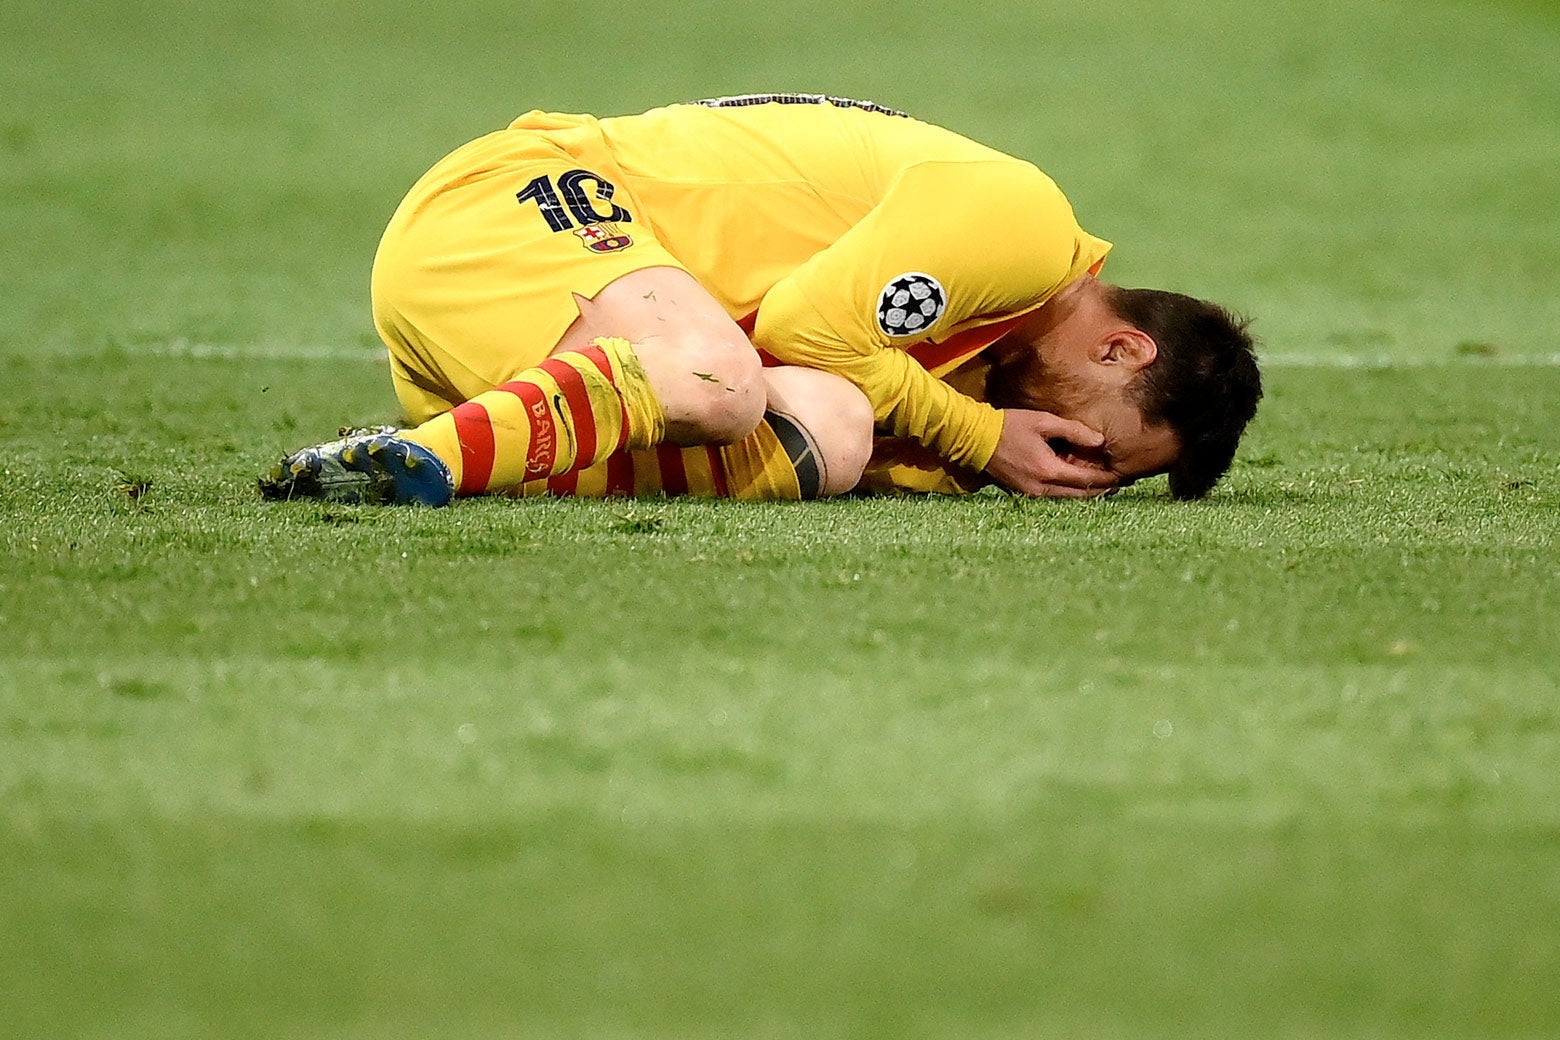 Messi curled up on the pitch with his face in his hands crying